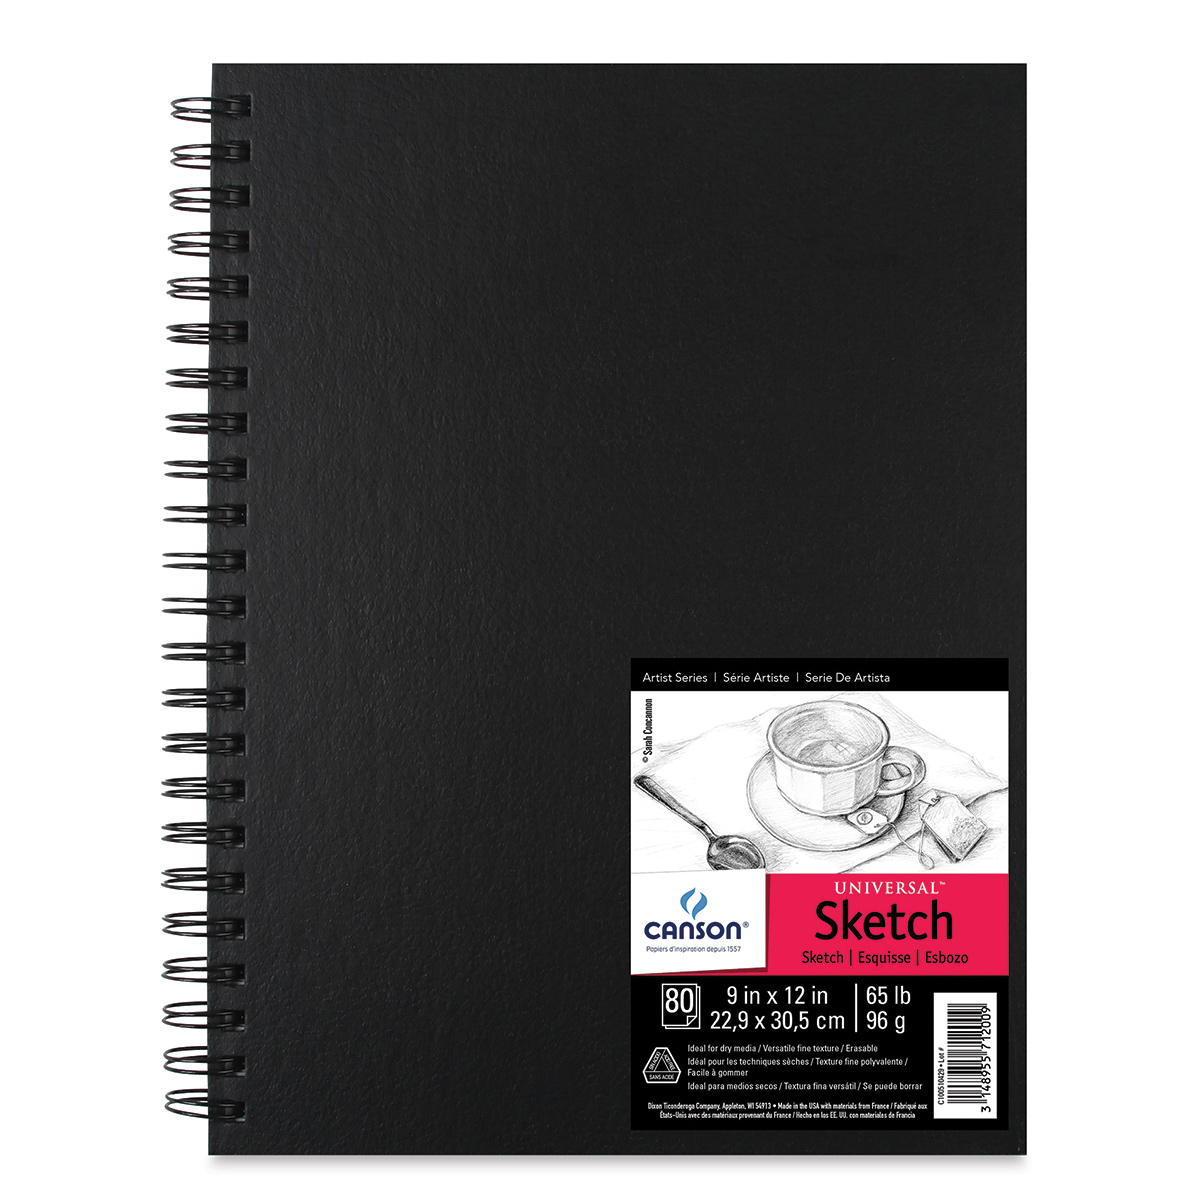 Leather Sketchbook Cover Case for Sketch Pad 9 X 12 , Artist